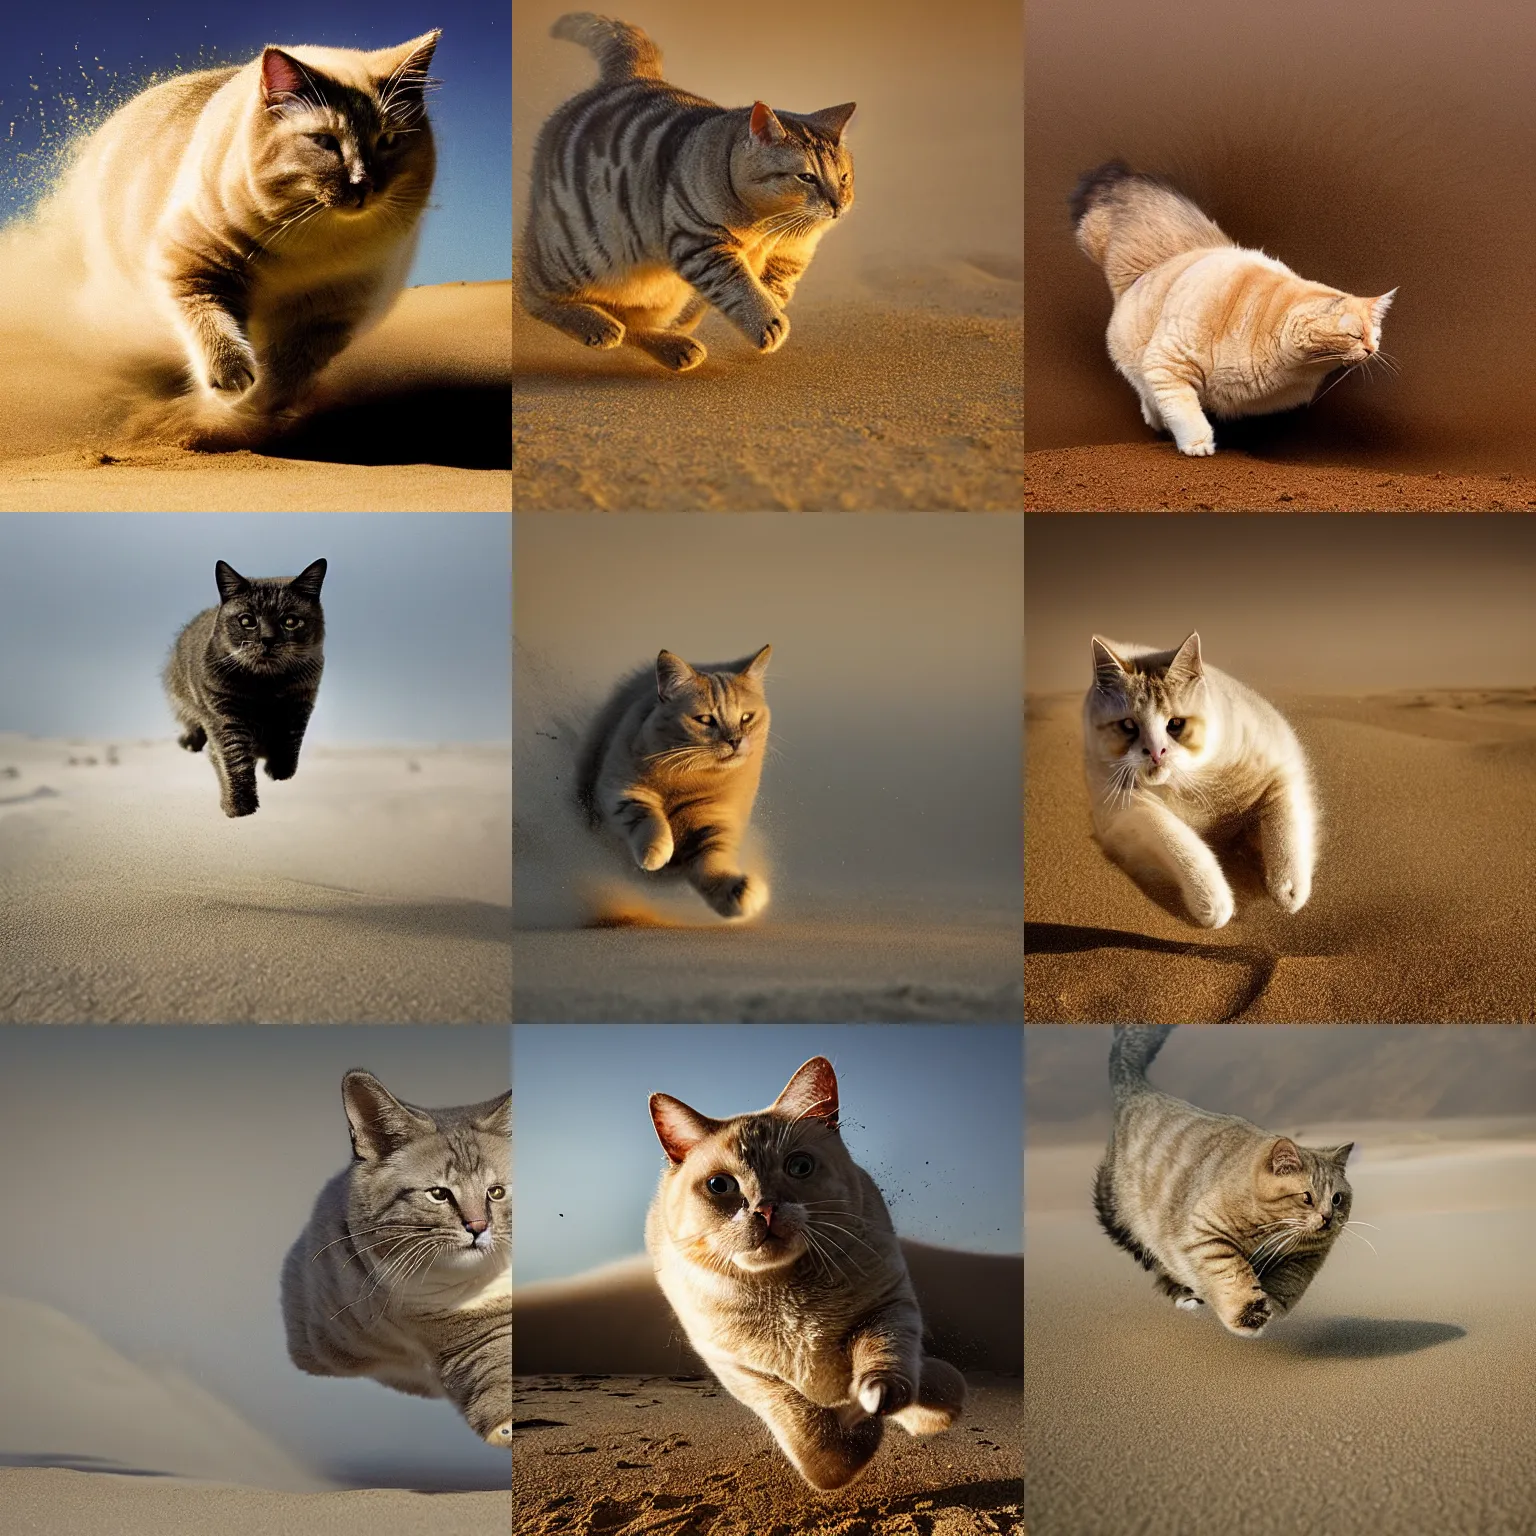 Prompt: award winning wildlife photography, a fat house cat, midair, running towards the camera, straight shot, high shutter speed, dust and sand in the air, wildlife photography by Paul Nicklen, shot by Joel Sartore, Skye Meaker, national geographic, perfect lighting, blurry background, bokeh